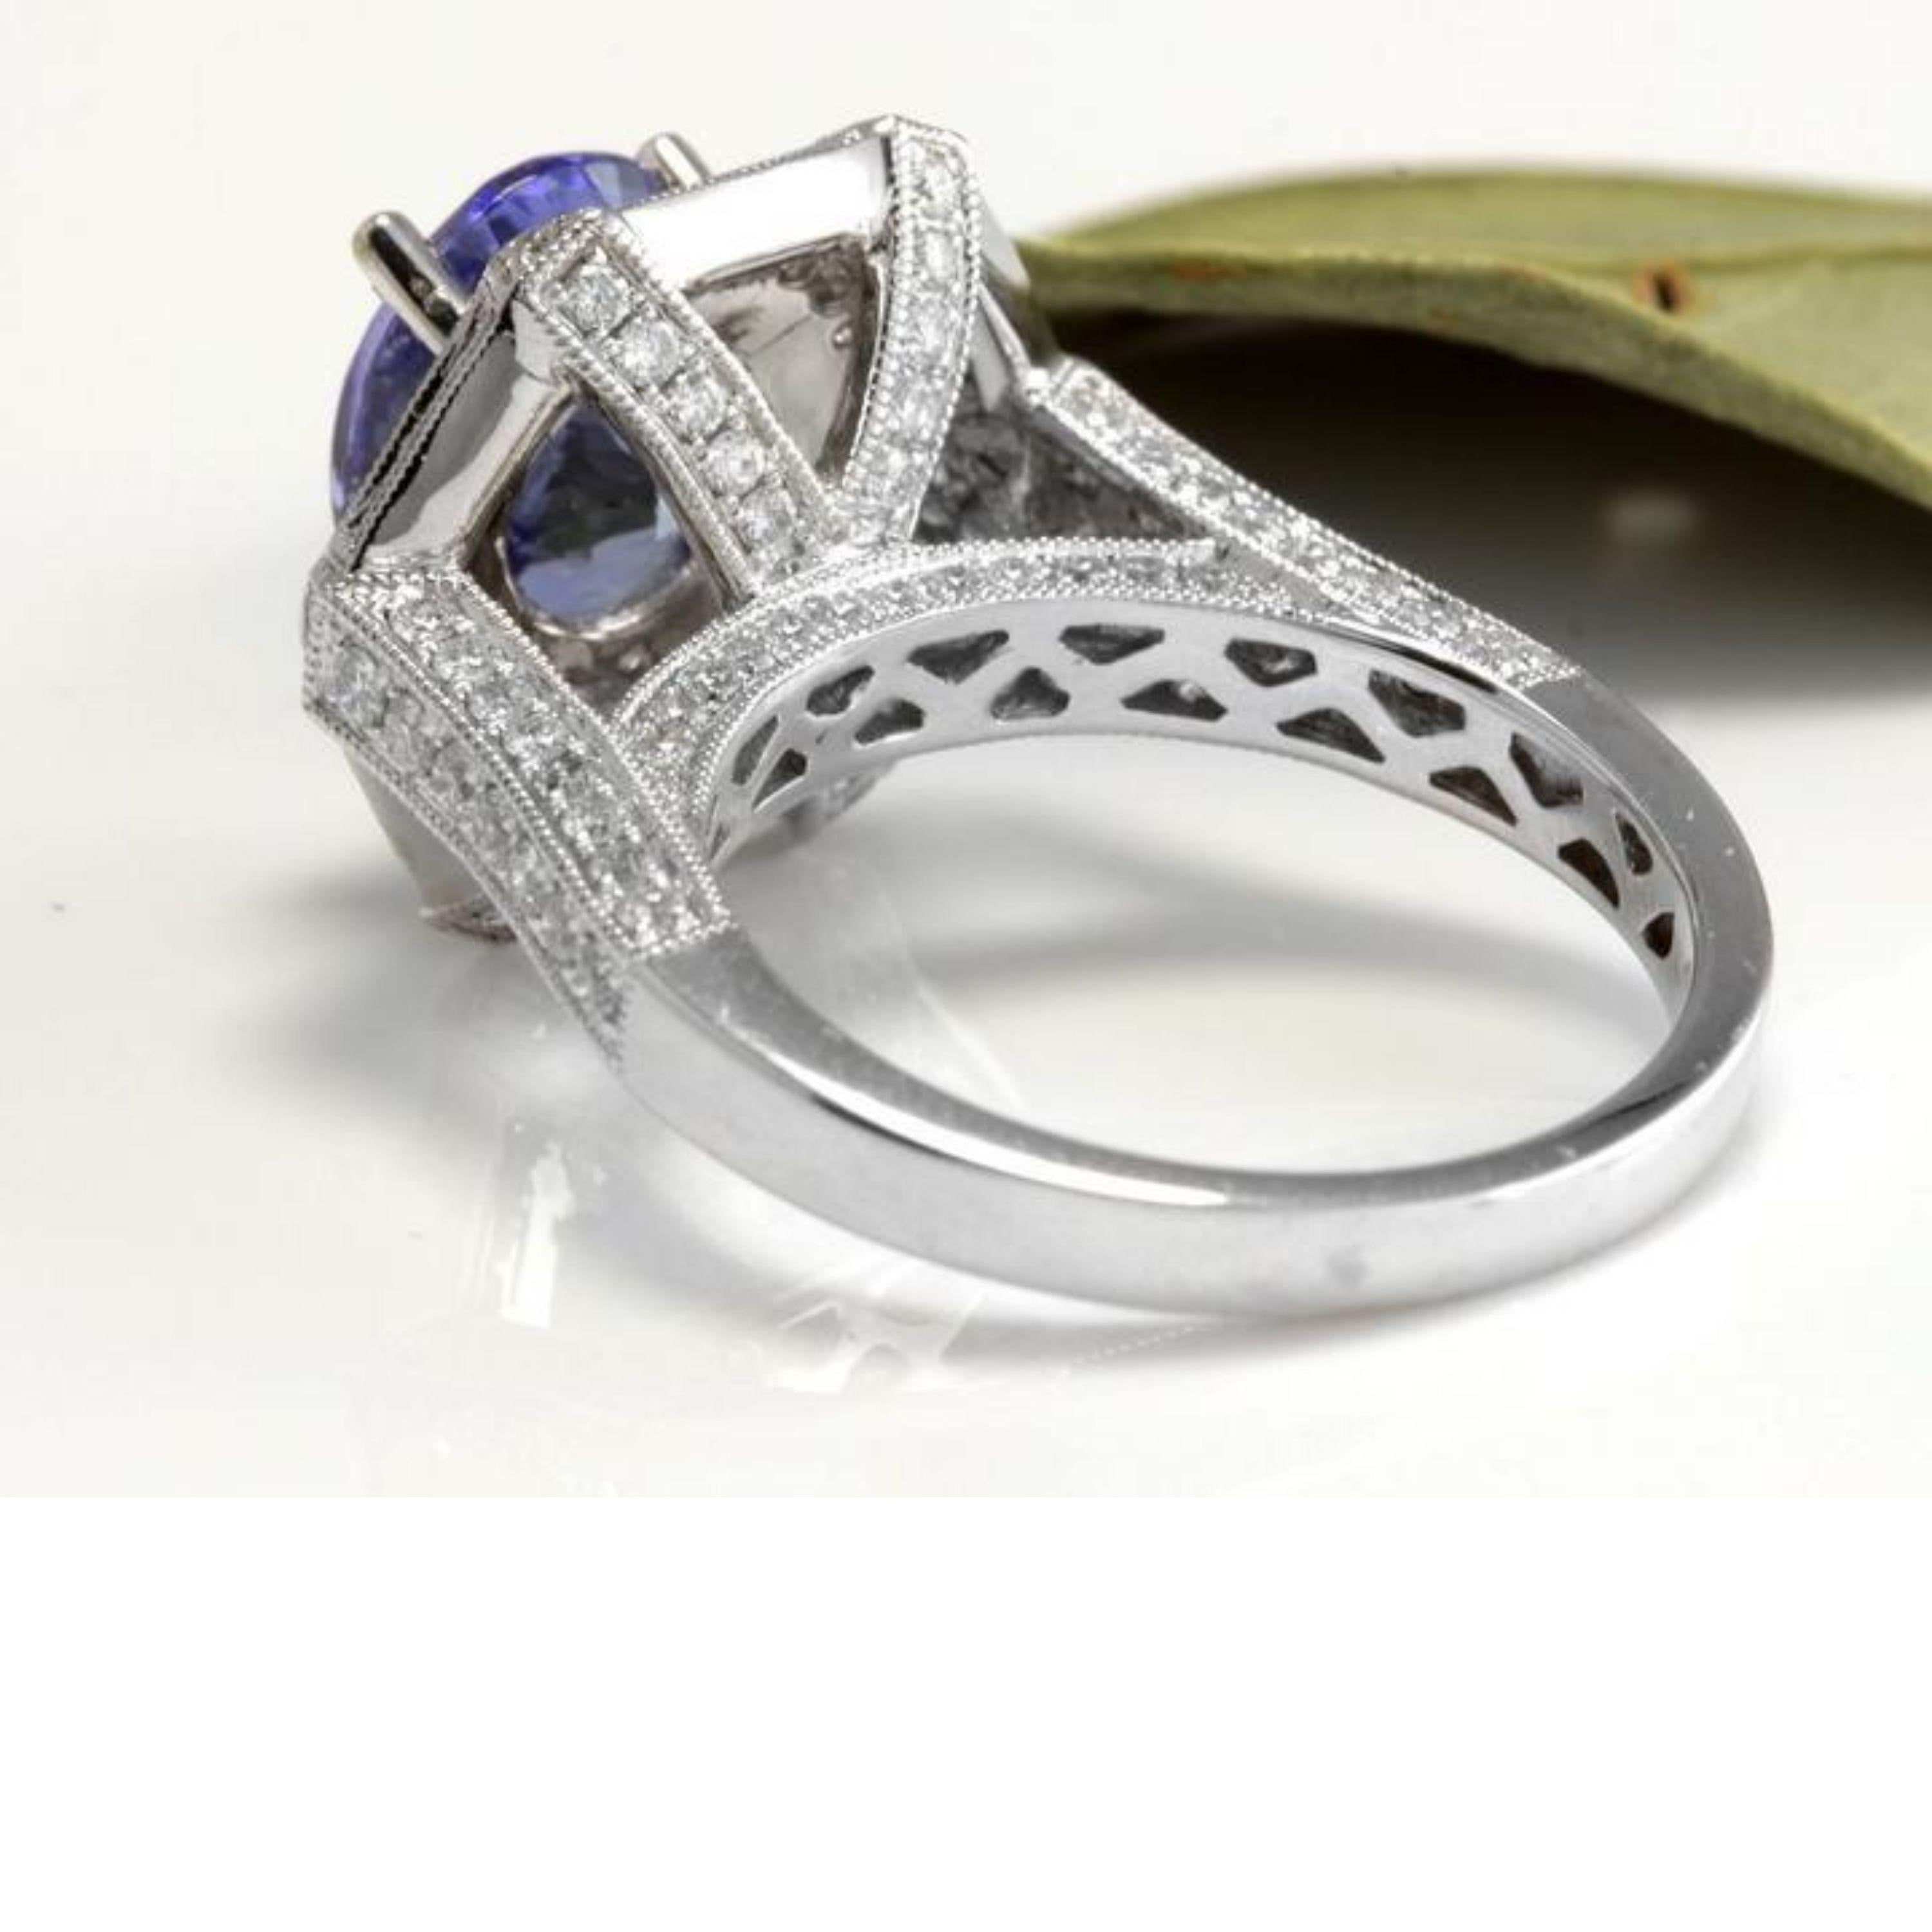 5.35 Carat Natural Tanzanite and VS1 Diamond 18 Karat Solid White Gold Ring In New Condition For Sale In Los Angeles, CA